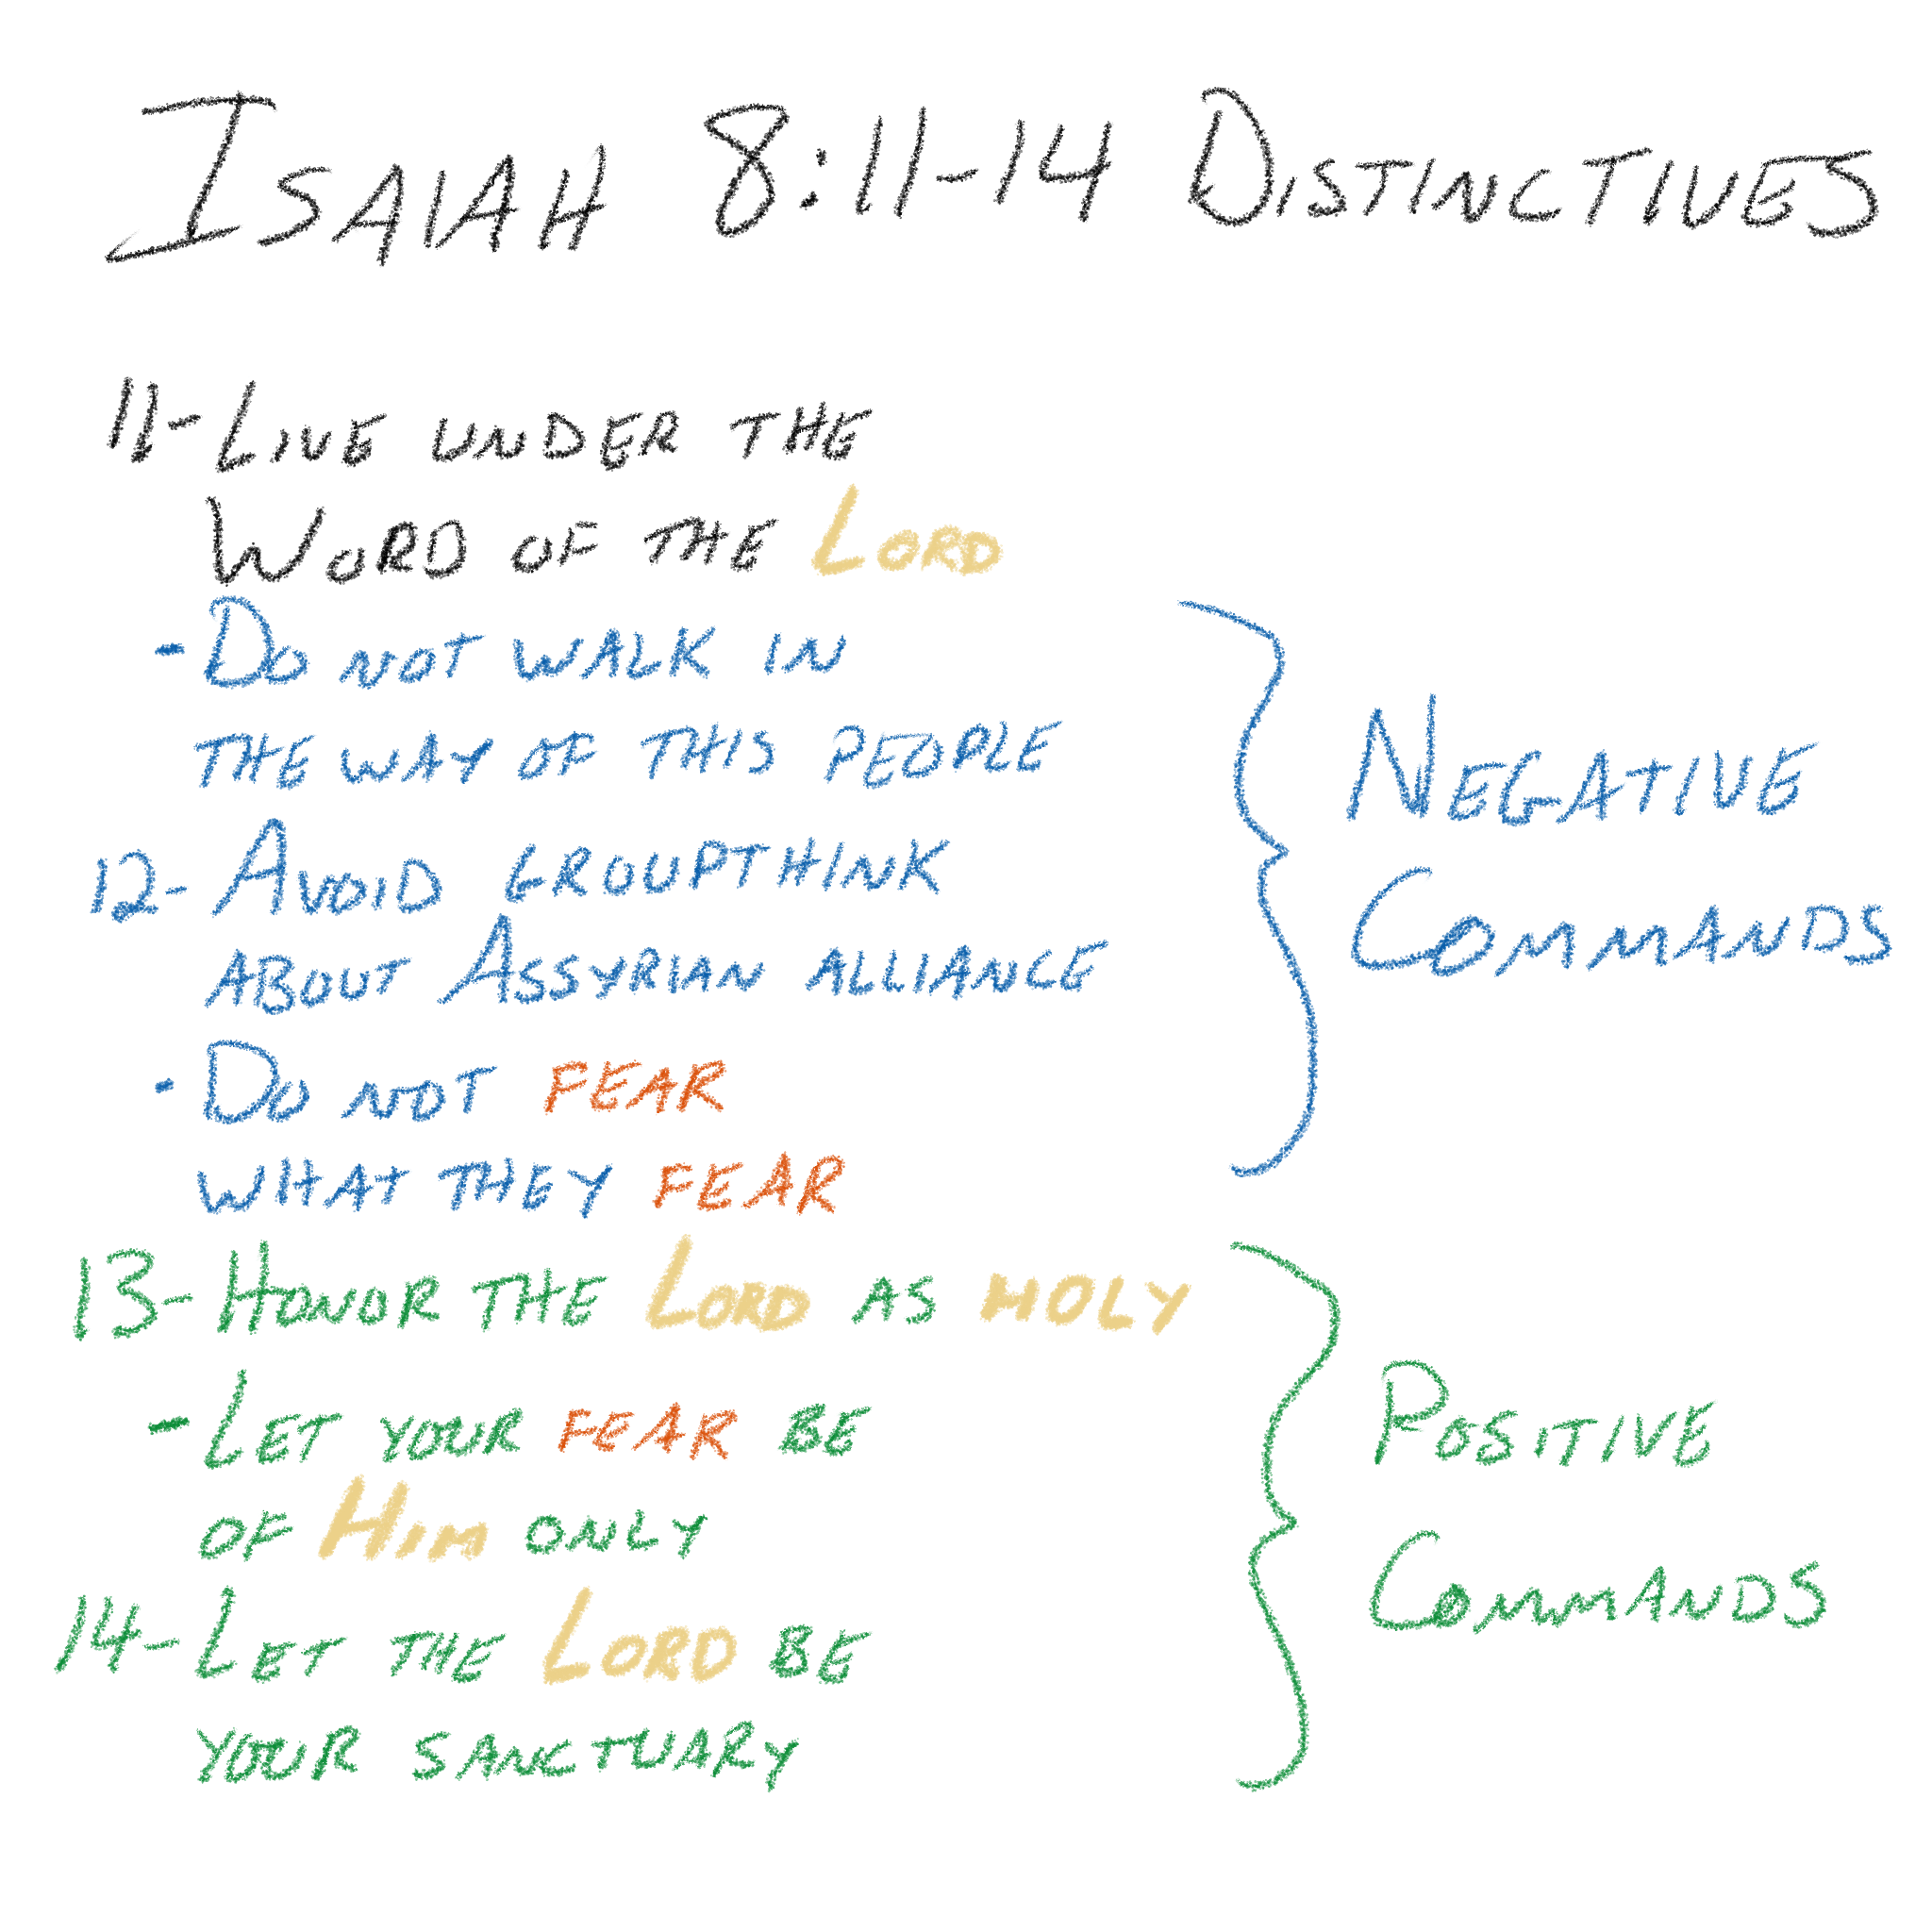 Isaiah 8:11–14 - Negative and Positive Commands